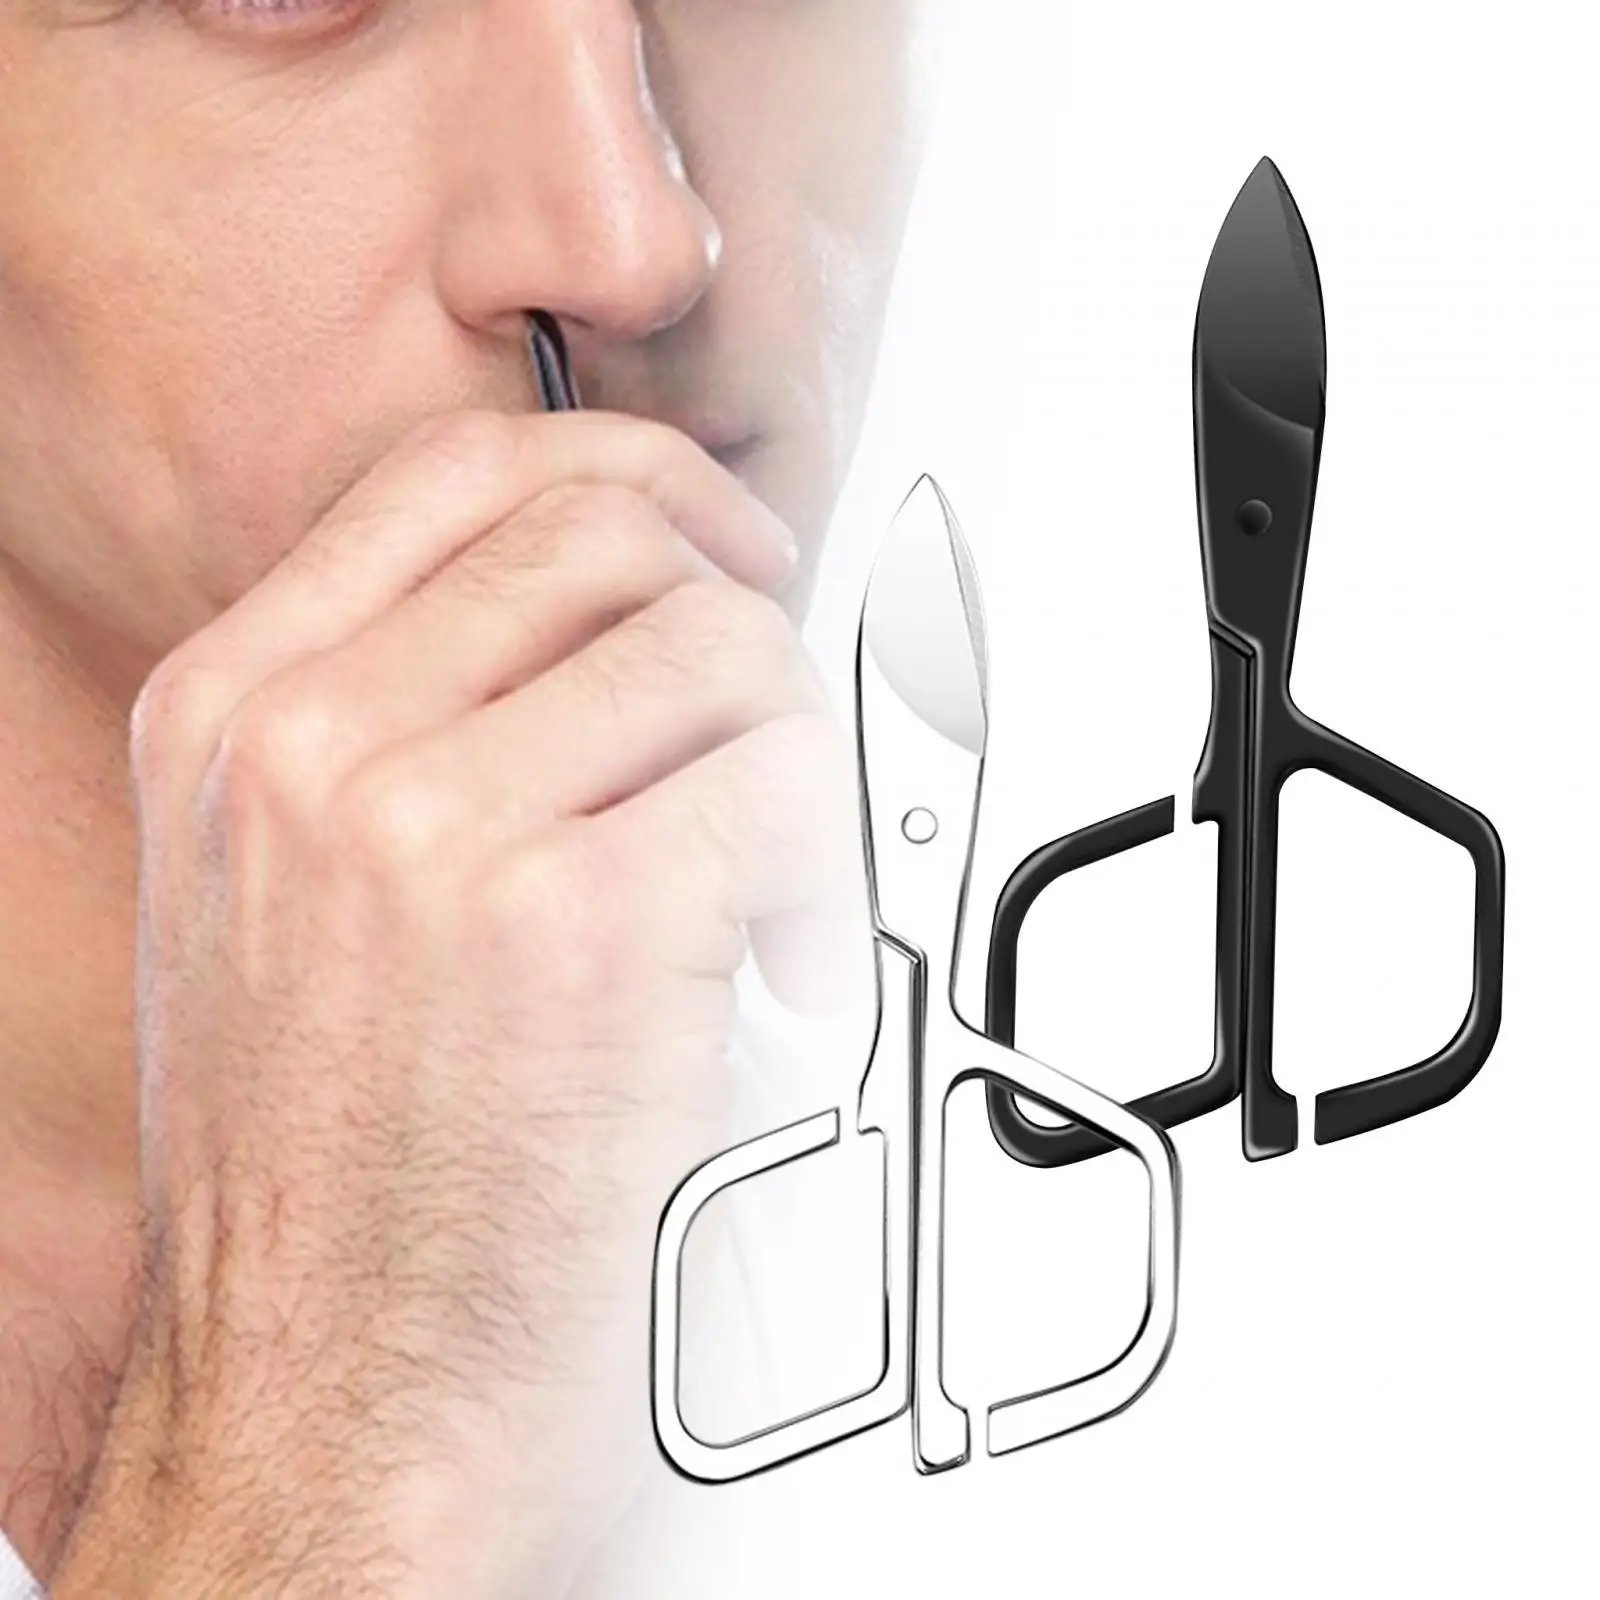 Nose Hair Scissors Accessories Exquisite Practical Small Scissors Beauty for Eyelashes Eyebrow Trimming Beard Ear Hair